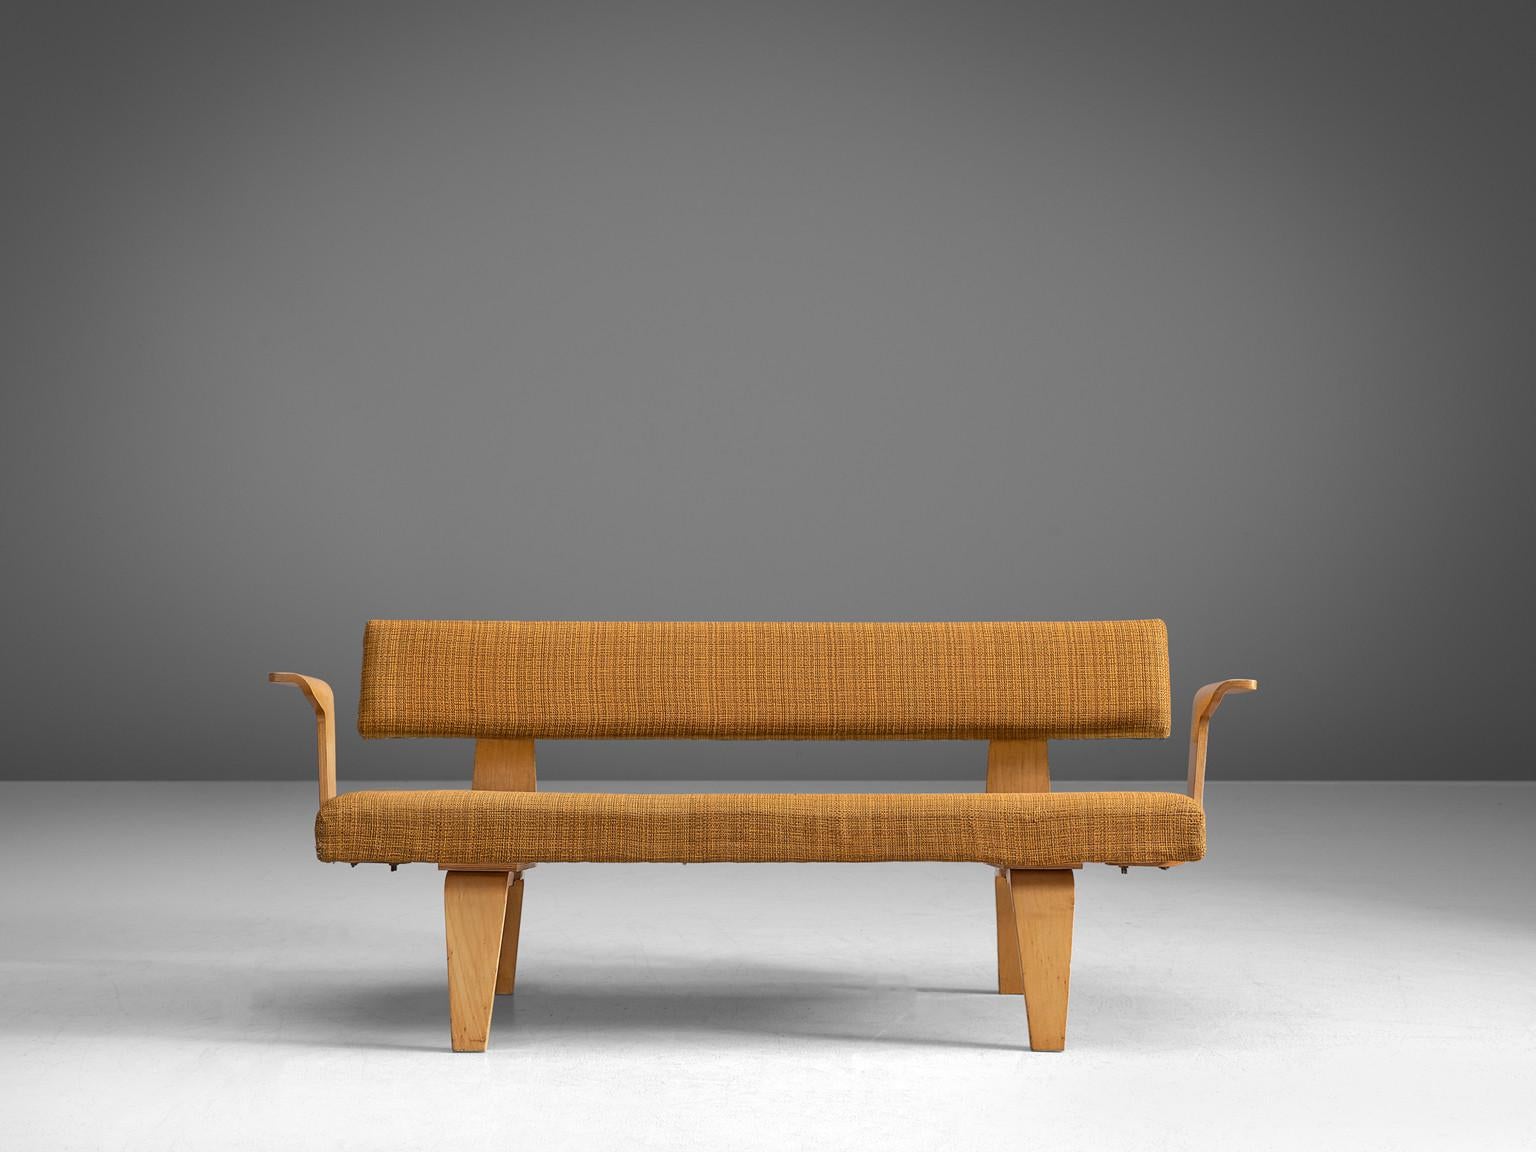 Cor Alons for Den Boer, sofa, beech plywood, fabric, The Netherlands, designed in 1947

This sofa in plywood gets its aesthetics mostly from its functionality and materials. Cor Alons choose beech plywood for the characteristics and possibilities of